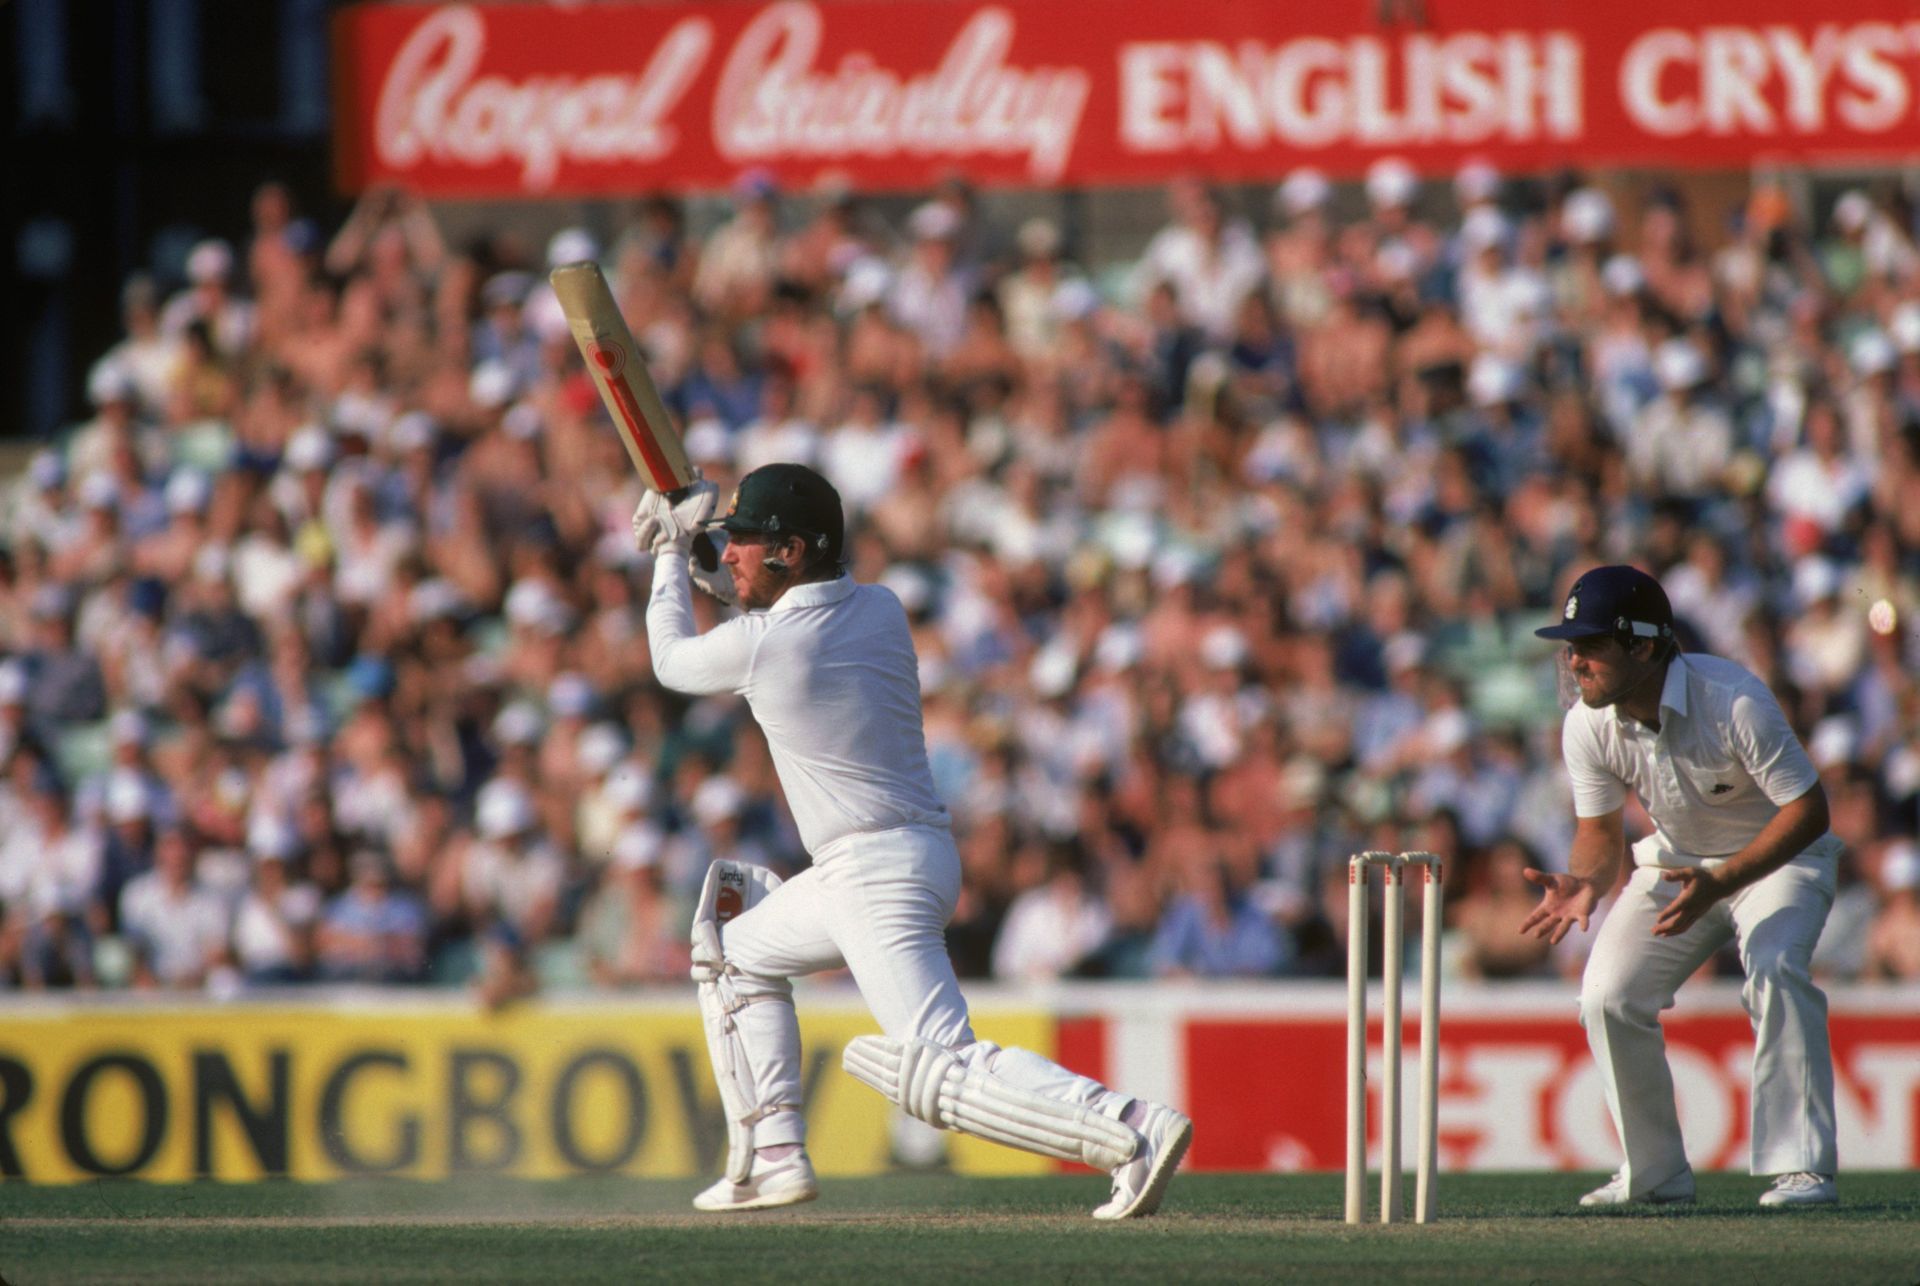 Former Australian skipper Allan Border batting during the 1981 Ashes. Pic: Getty Images